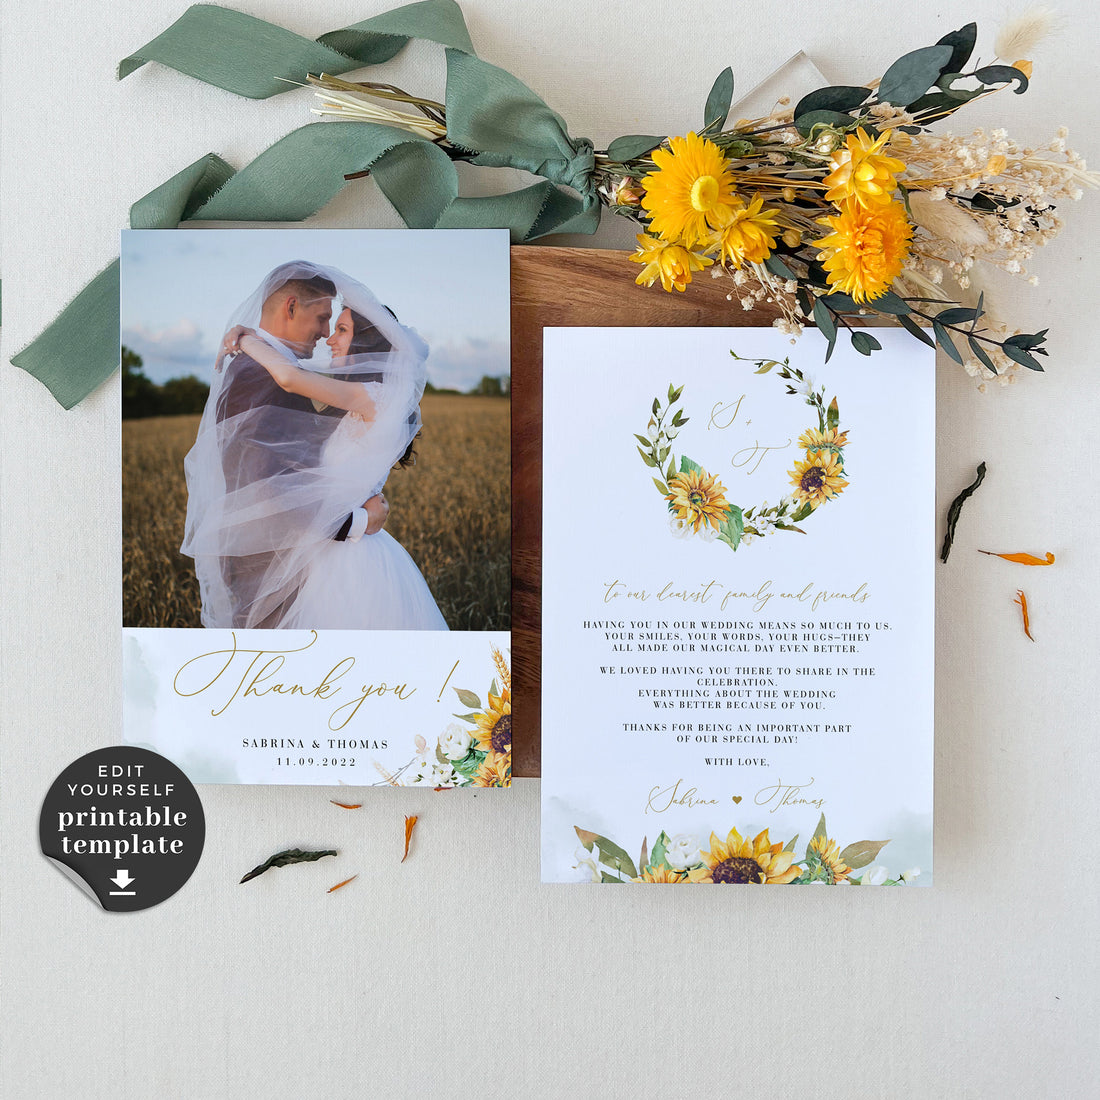 Marisol | Printable Sunflowers Wedding Thank You Cards With Photo